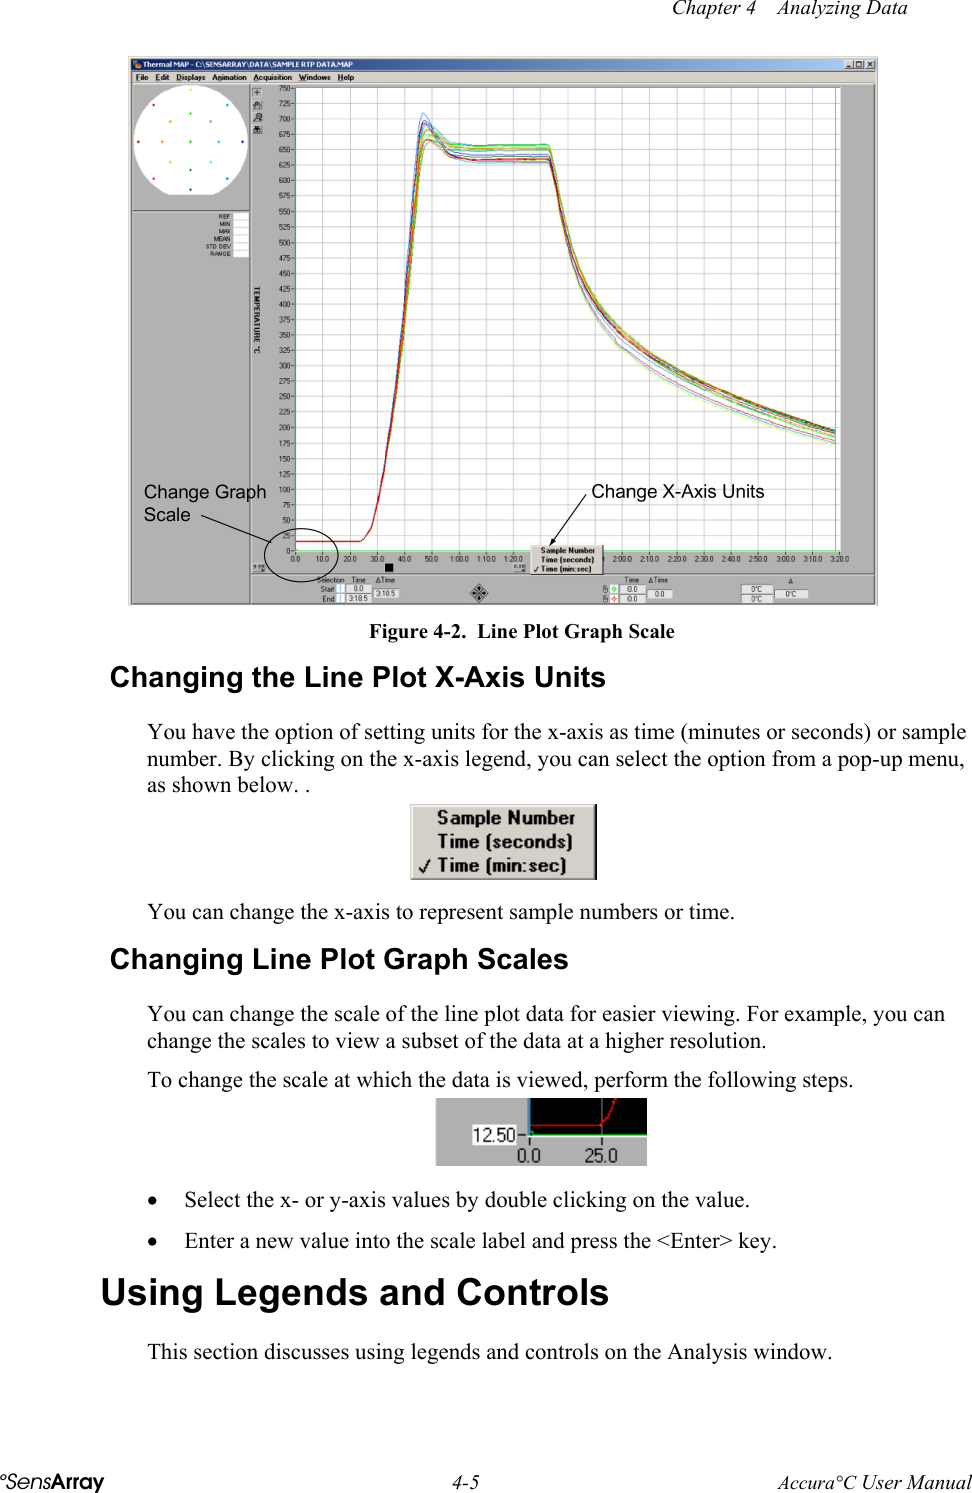  Chapter 4    Analyzing Data °SensArray 4-5 Accura°C User Manual  Figure 4-2.  Line Plot Graph Scale Changing the Line Plot X-Axis Units You have the option of setting units for the x-axis as time (minutes or seconds) or sample number. By clicking on the x-axis legend, you can select the option from a pop-up menu, as shown below. .  You can change the x-axis to represent sample numbers or time.  Changing Line Plot Graph Scales You can change the scale of the line plot data for easier viewing. For example, you can change the scales to view a subset of the data at a higher resolution. To change the scale at which the data is viewed, perform the following steps.  •  Select the x- or y-axis values by double clicking on the value. •  Enter a new value into the scale label and press the &lt;Enter&gt; key.  Using Legends and Controls This section discusses using legends and controls on the Analysis window. 